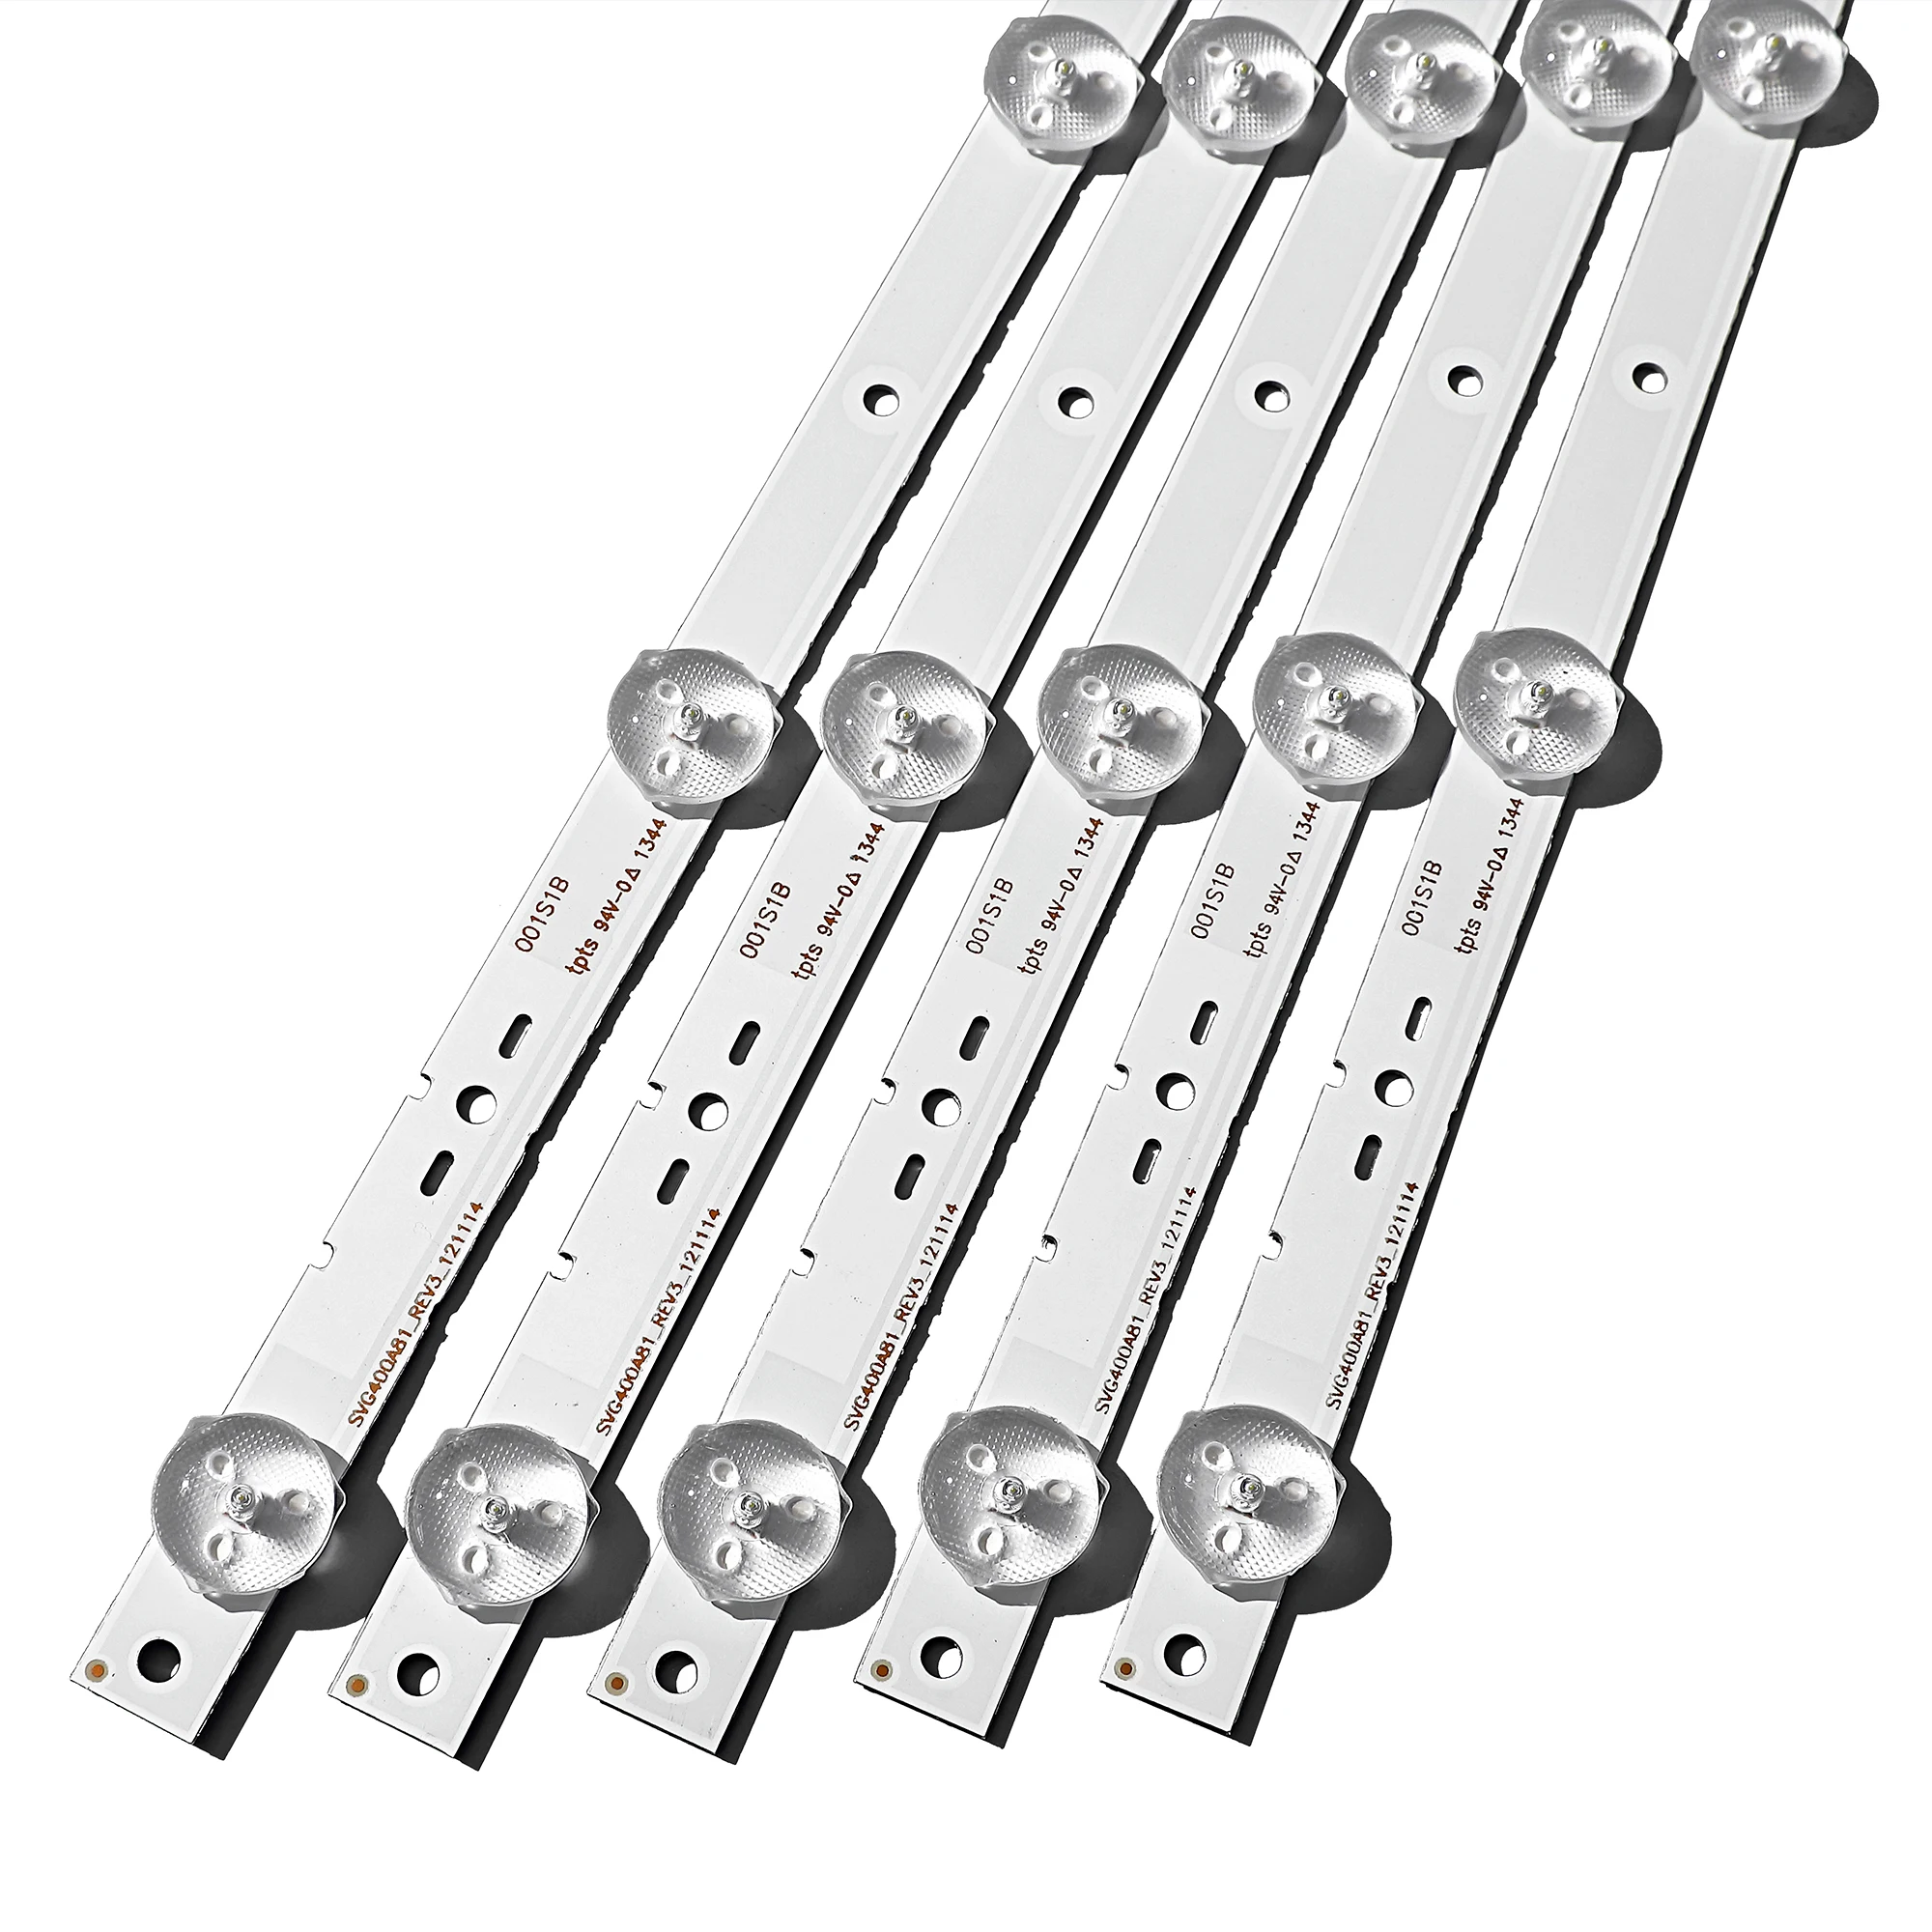 10piece/lot   FOR  SONY  Use 40 inch TV BACKLIGHTS  FOR LED BAR SUG400A81_REV3_121114 FOR SONY KDL-40R473A